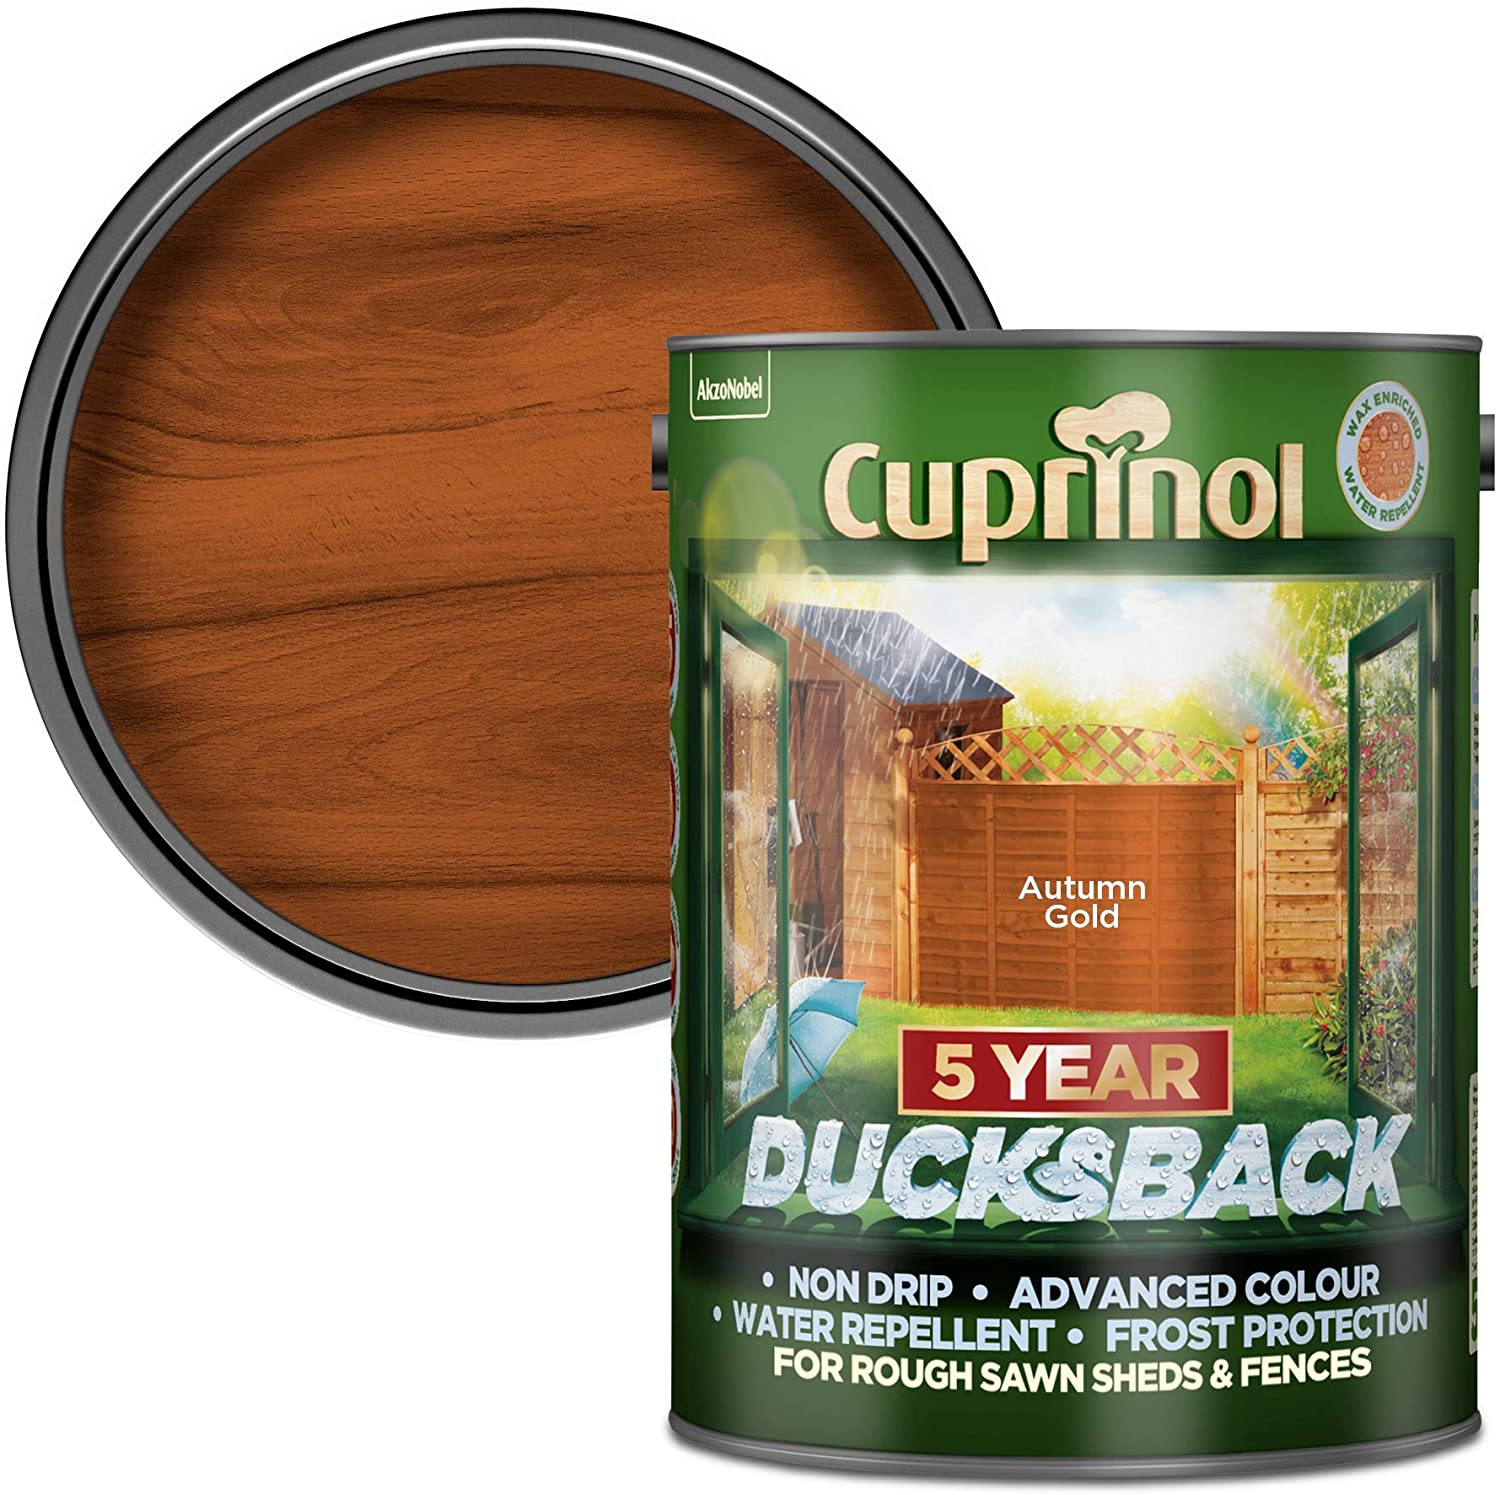 Cuprinol-Ducksback-5-Year-Waterproof-for-Sheds-and-Fences-Autumn-Gold-5-Litre